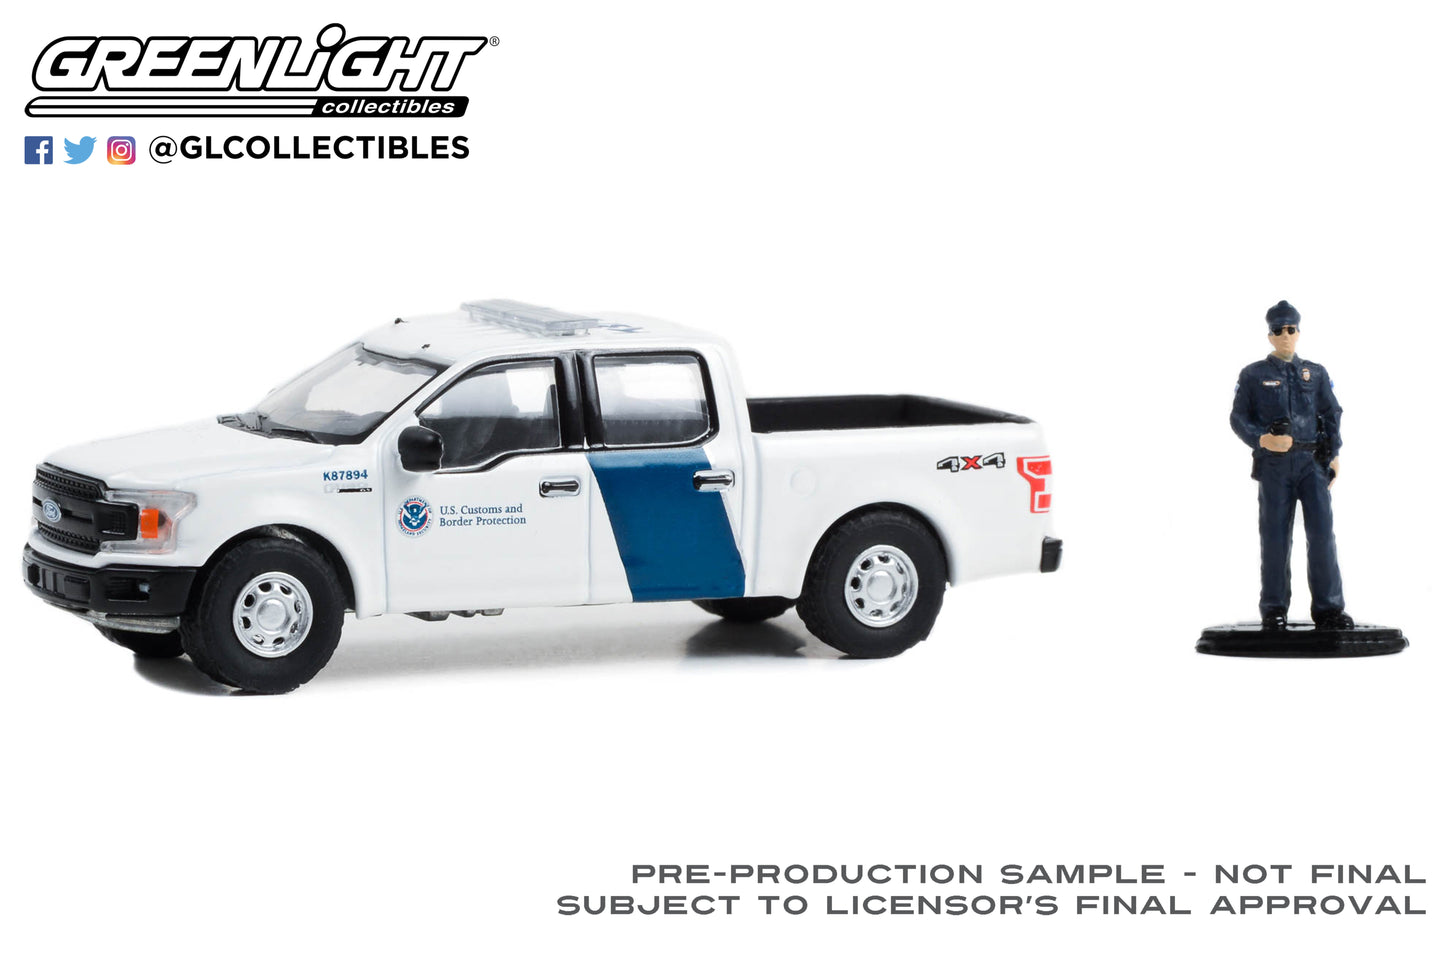 GreenLight 1:64 The Hobby Shop Series 15 - 2018 Ford F-150 XLT - U.S. Customs and Border Protection with Customs Officer 97150-F